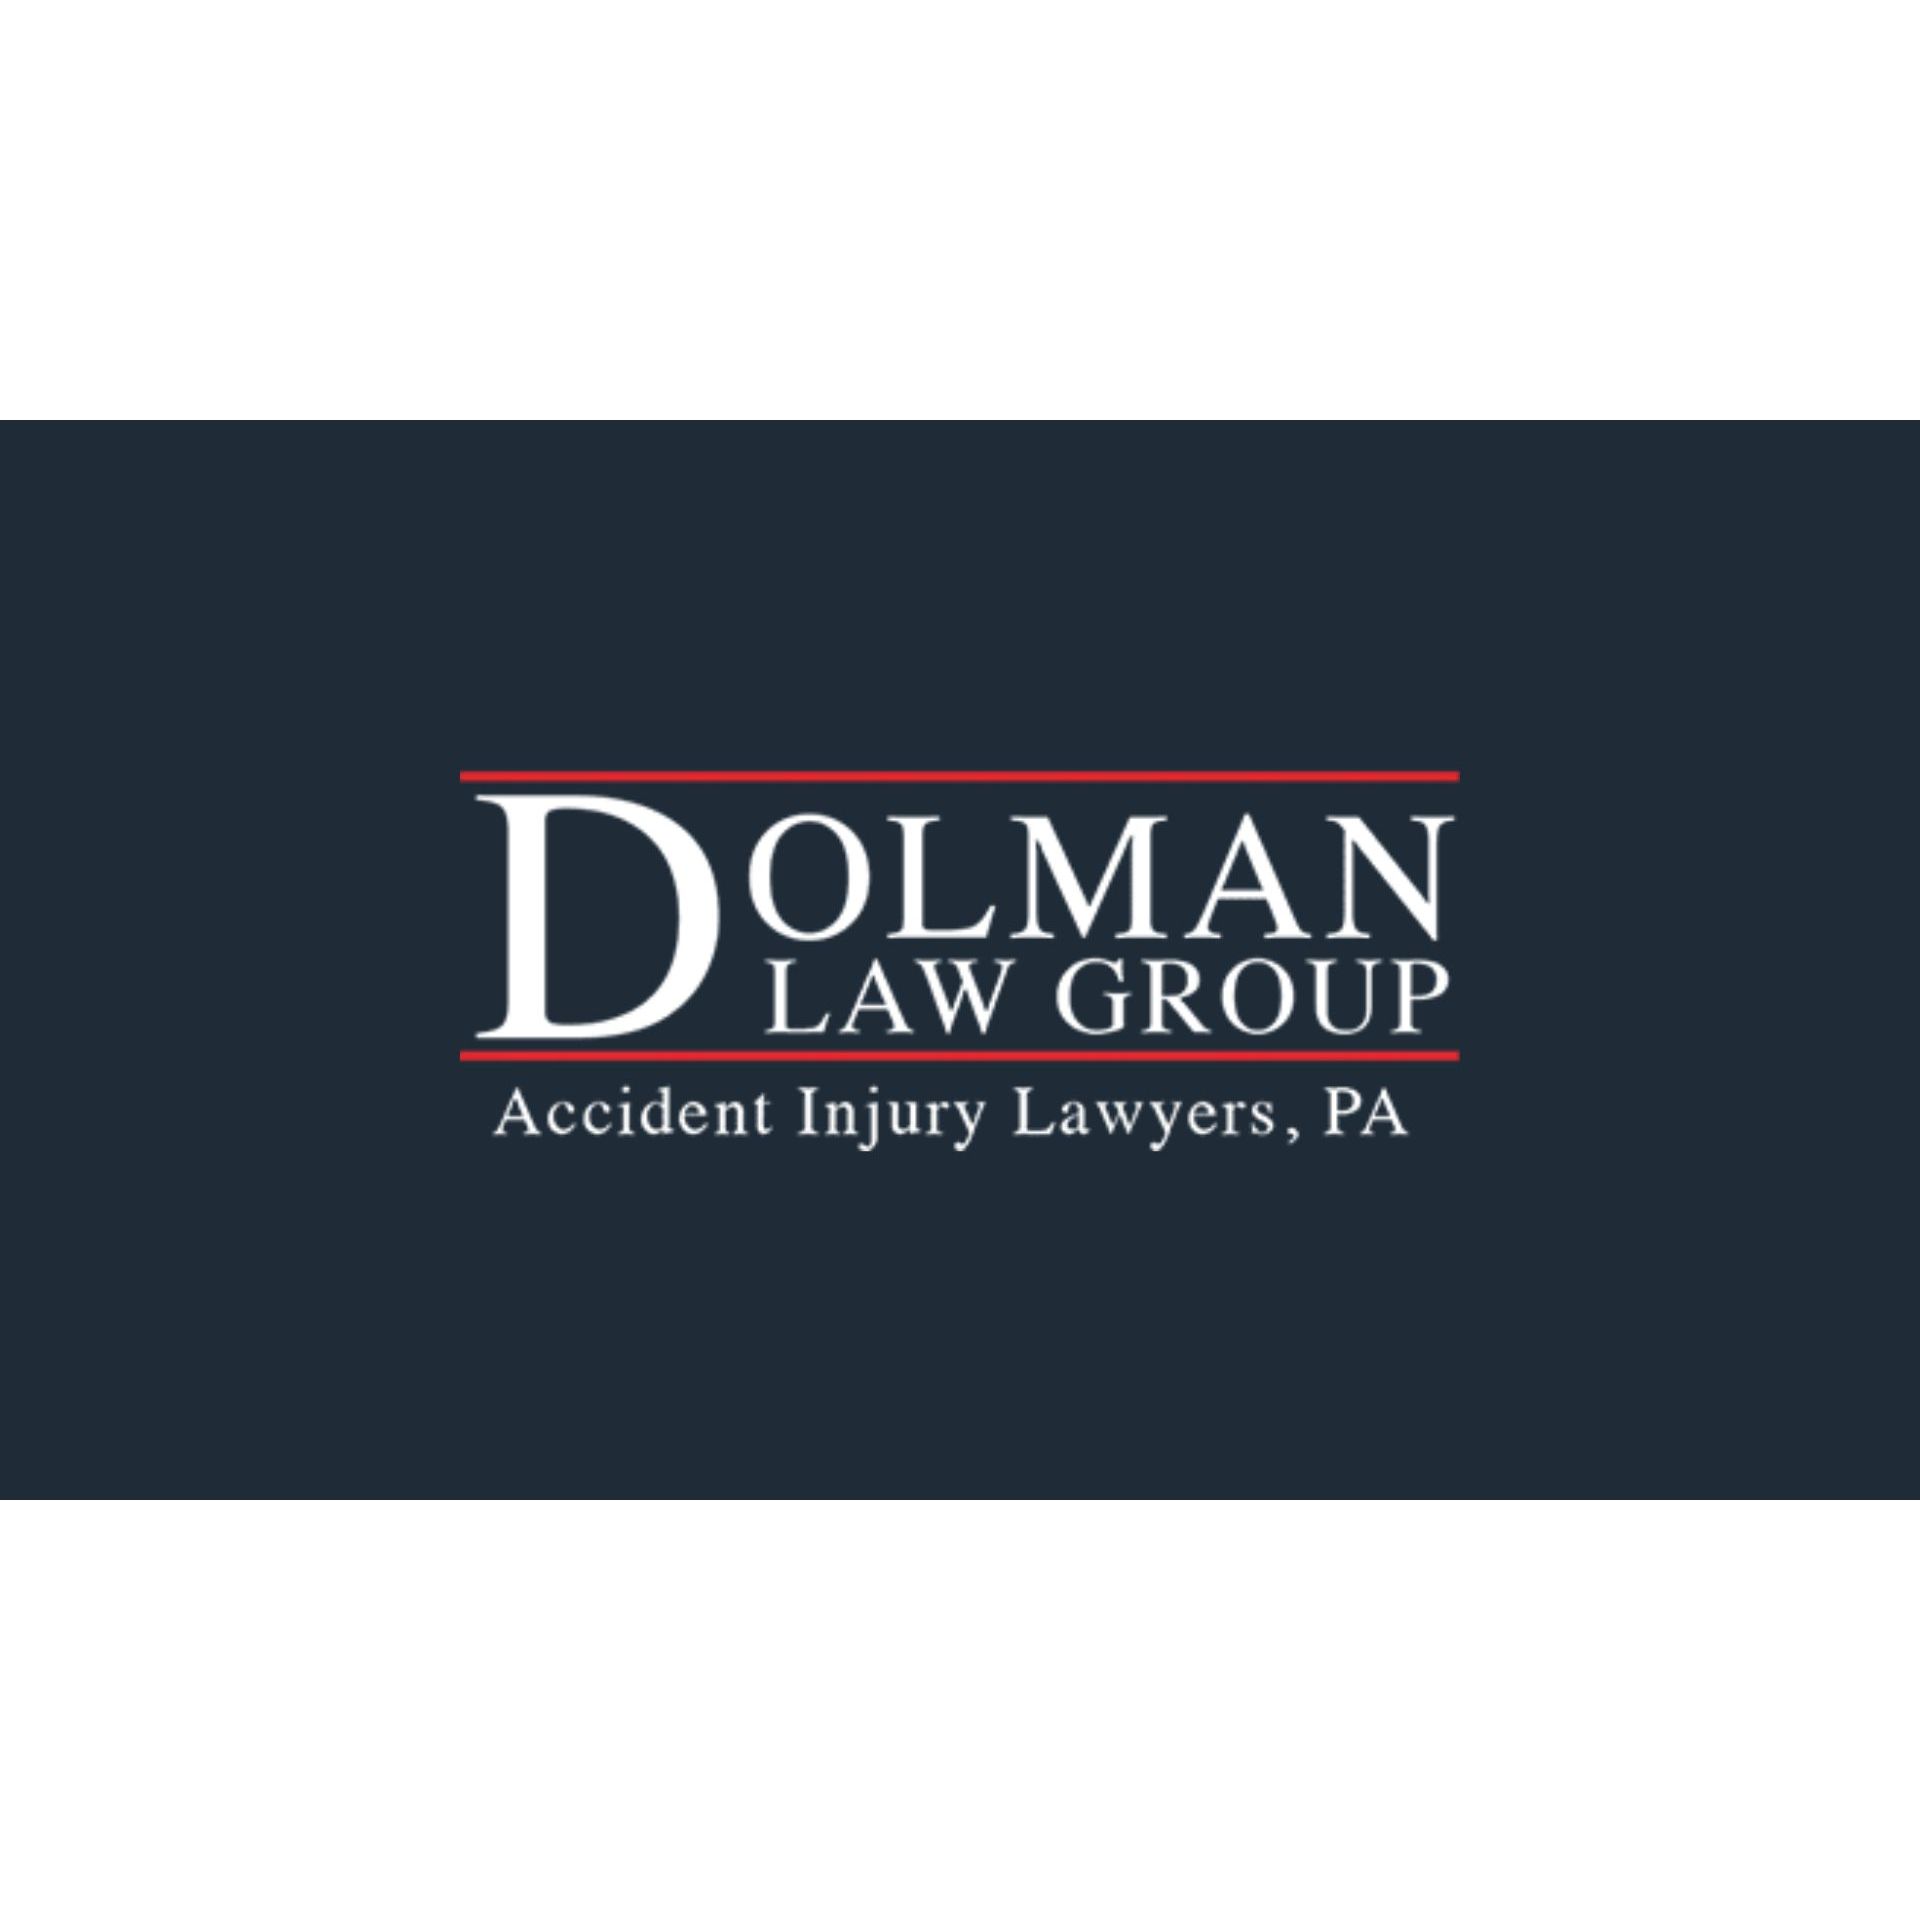 Dolman Law Group Leads Efforts in Toxic Baby Food Lawsuits - Law Firm Newswire